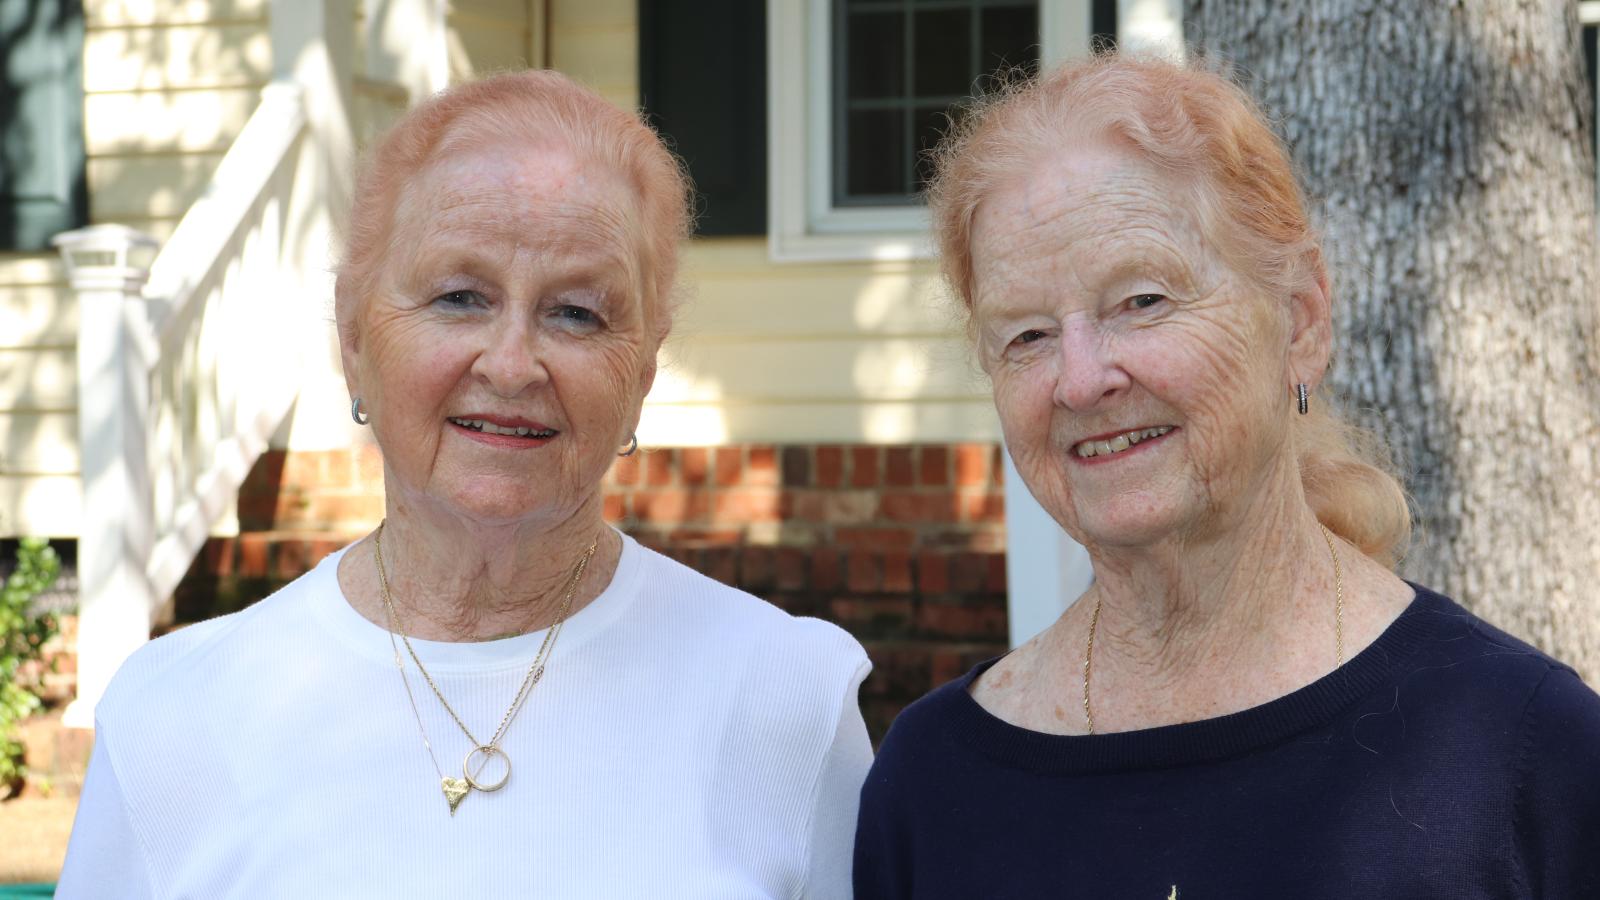 Jackie Jones Stone (left) and Jeanette Jones will establish the Jeanette A. Jones and Jacquelyn Jones Stone Nursing Honors Scholarship Fund through gifts in their wills. The twin sisters taught and cared for patients on the MCV Campus from the 1960s to the 1990s. Photo: Eric Peters